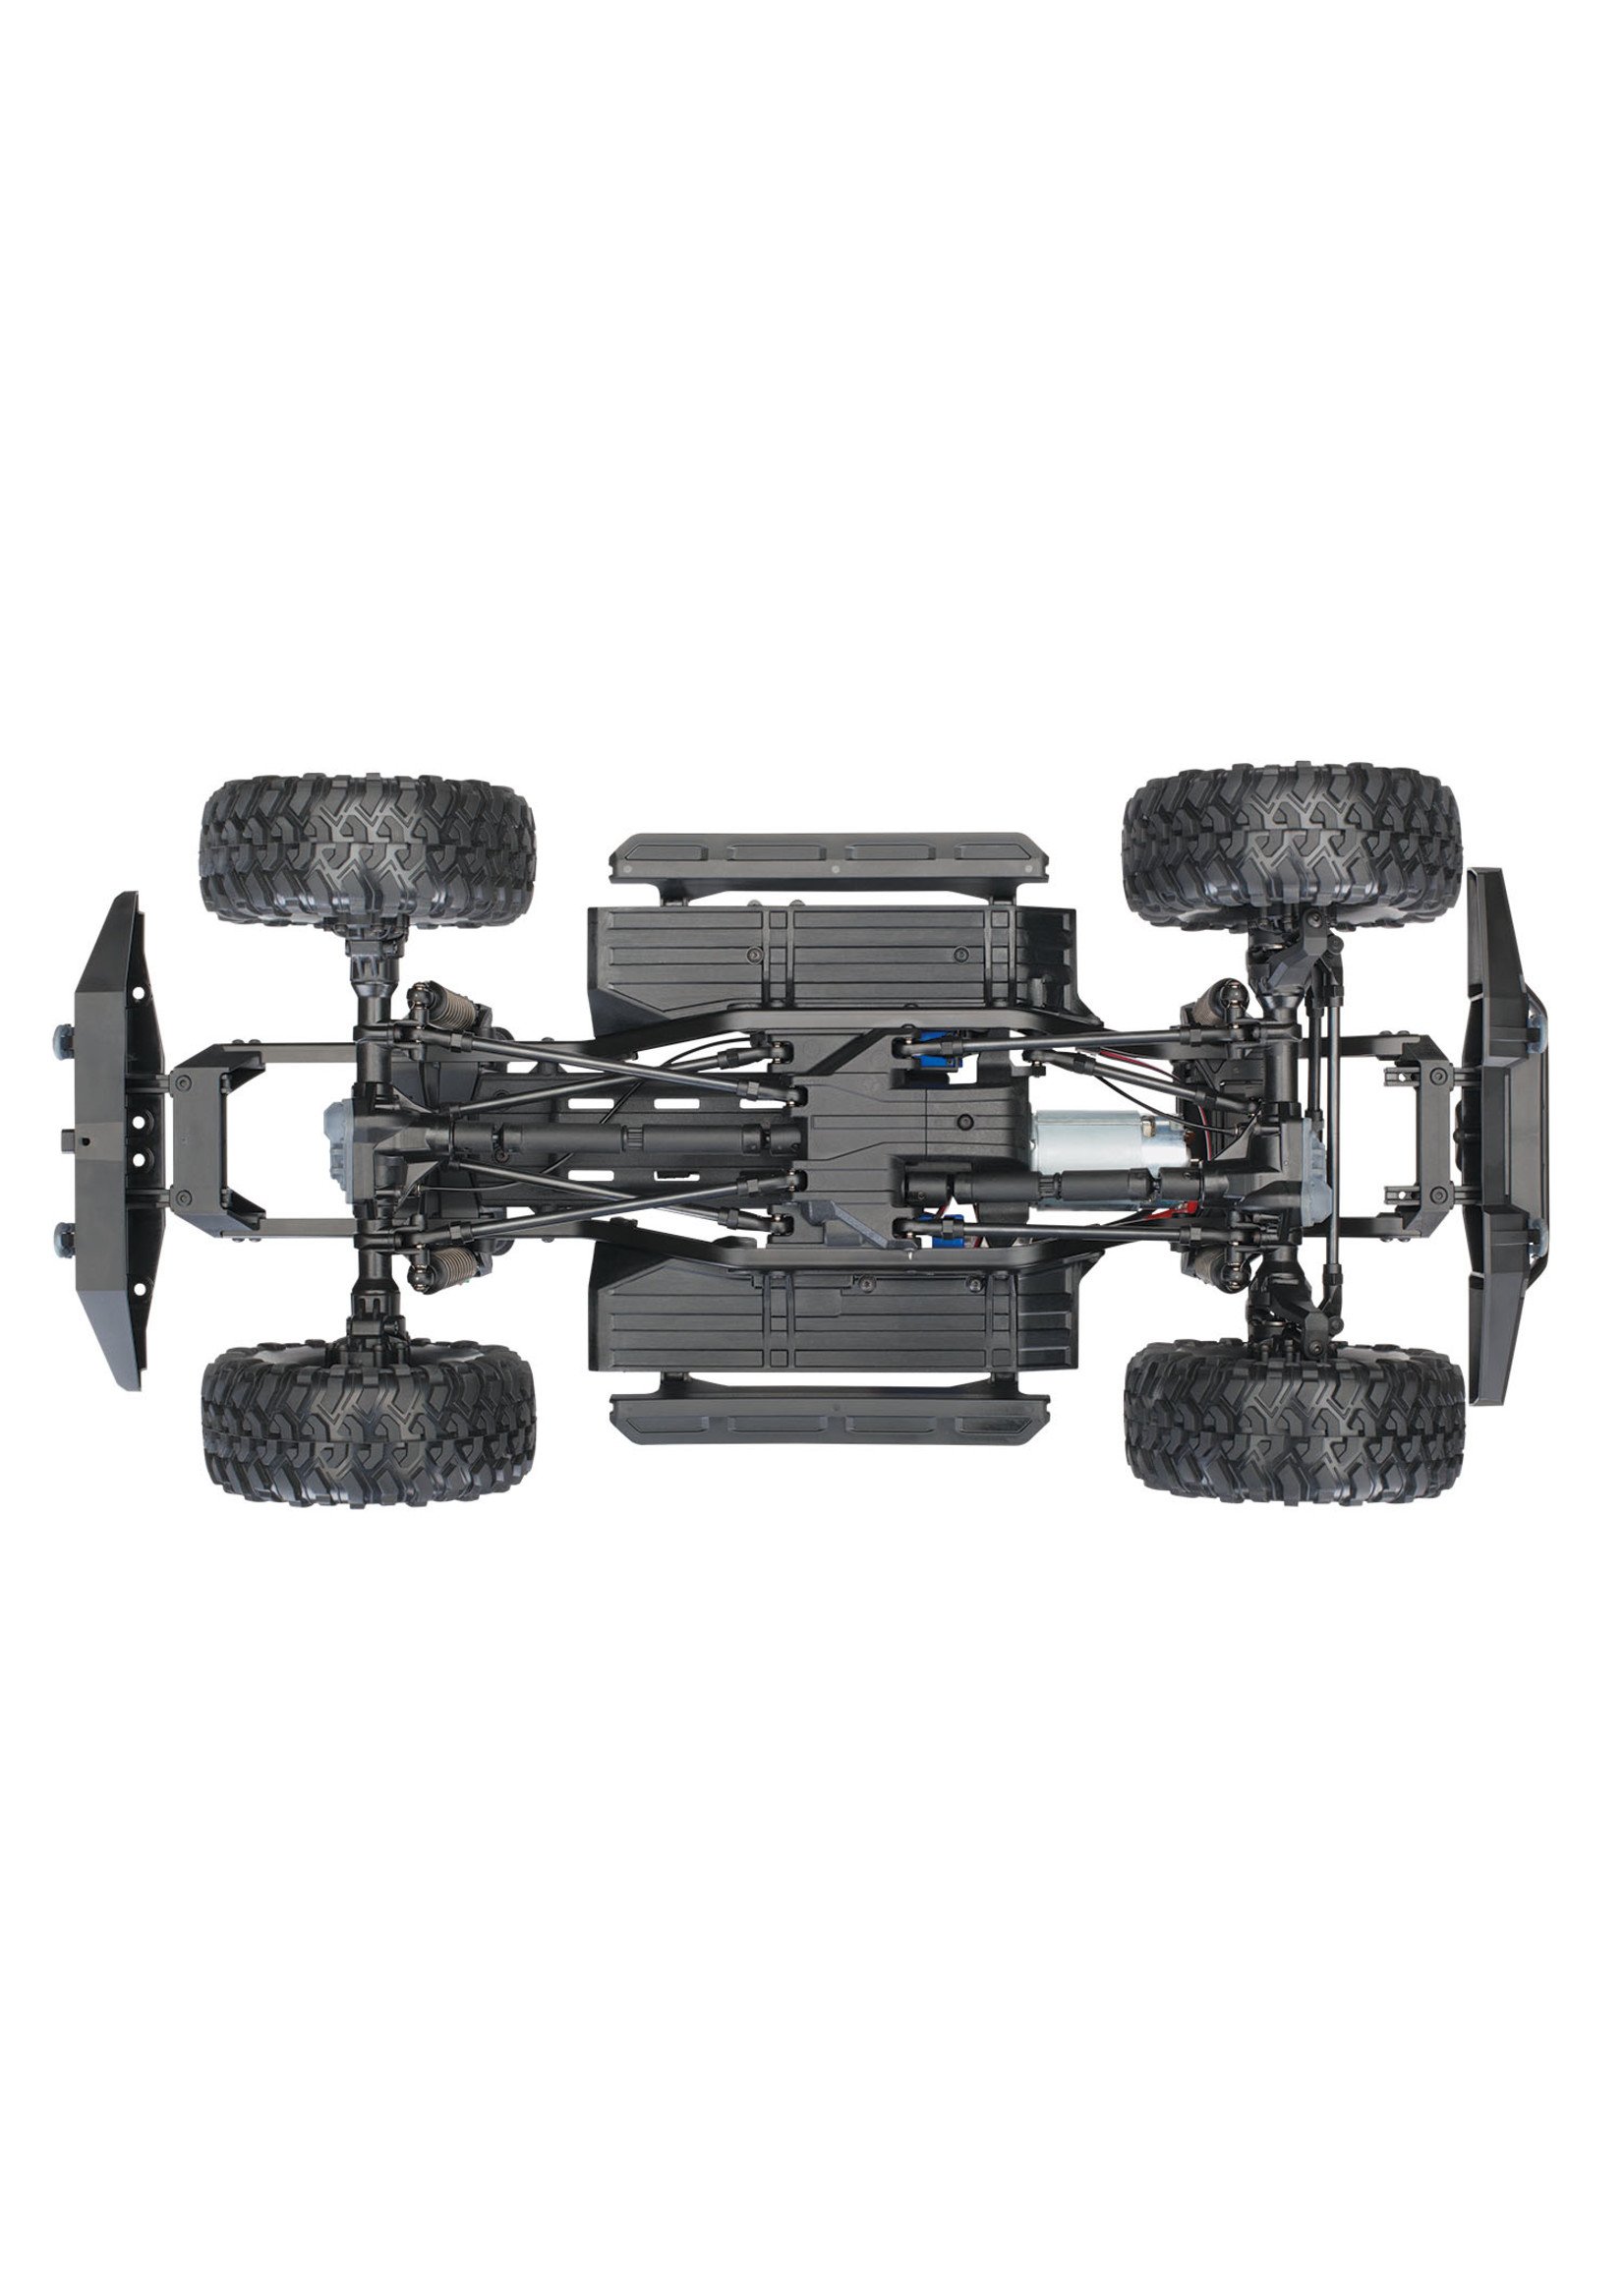 Traxxas 1/10 TRX-4 Defender RTR Scale and Trail Crawler - Sand